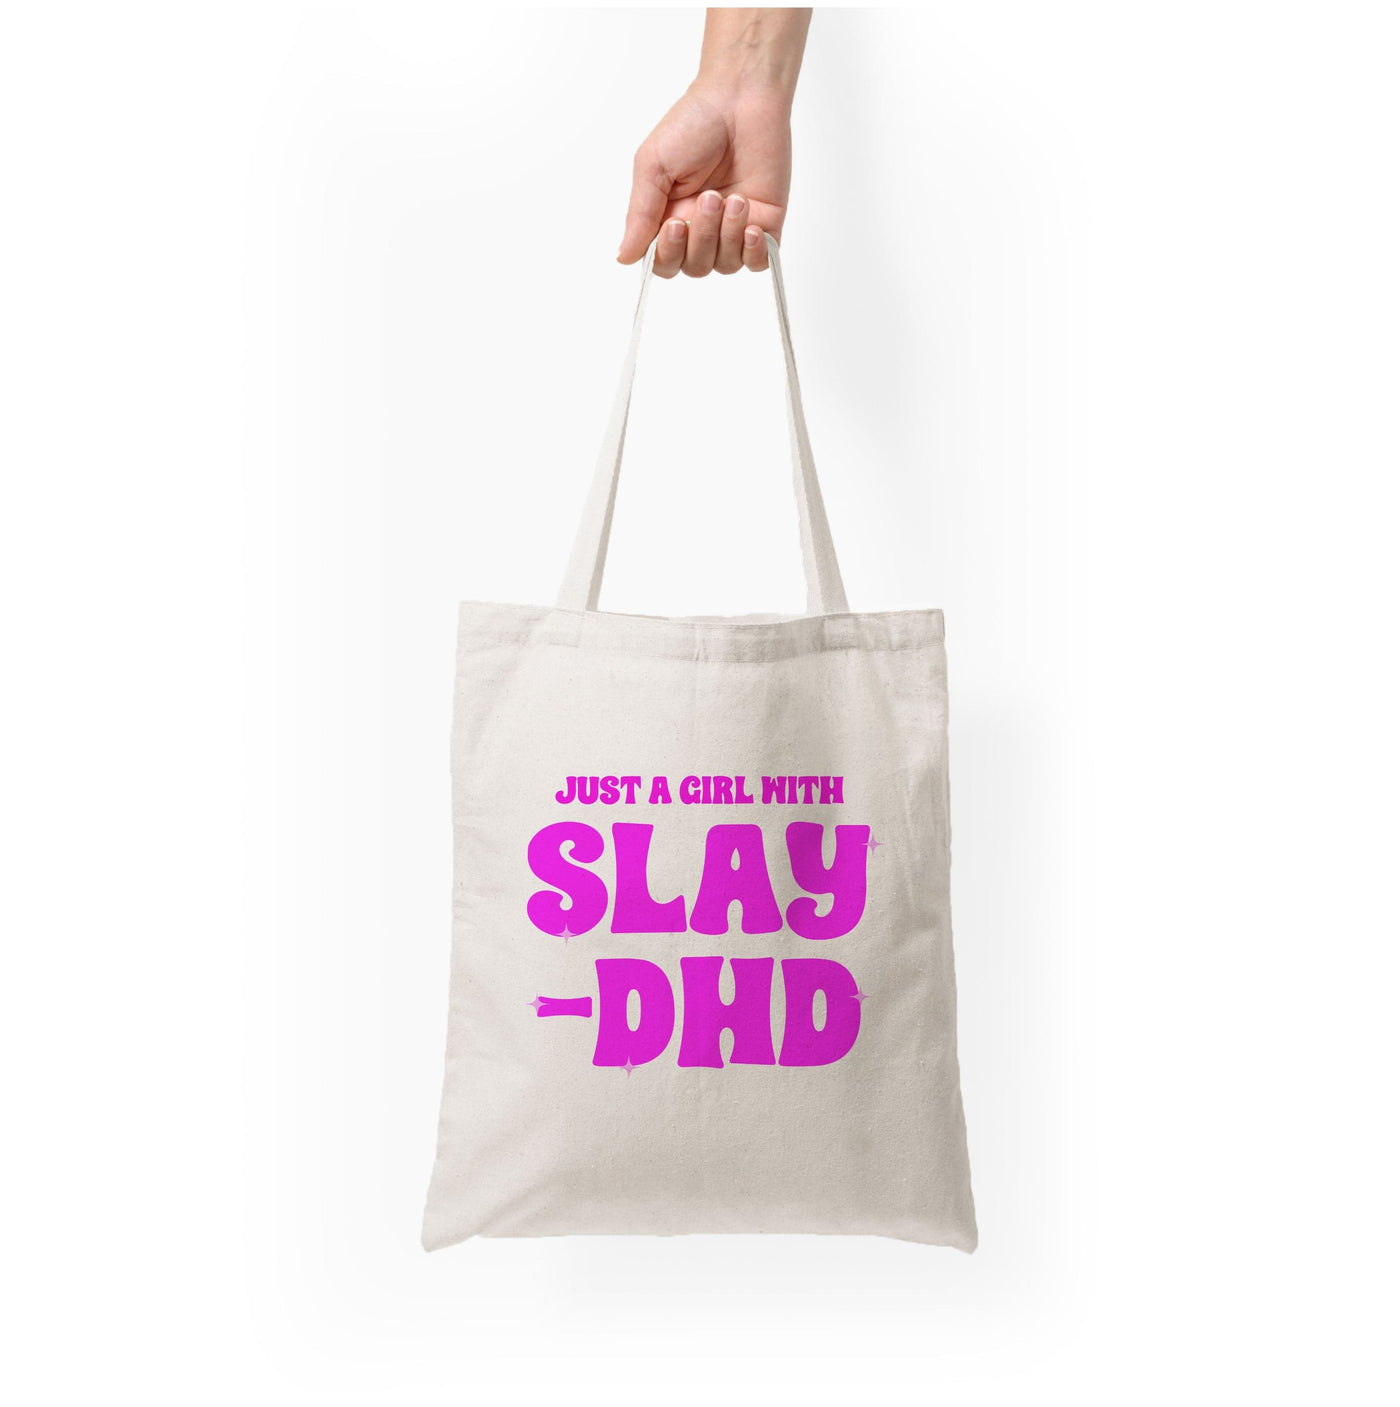 Just A Girl With Slay-DHD - TikTok Trends Tote Bag